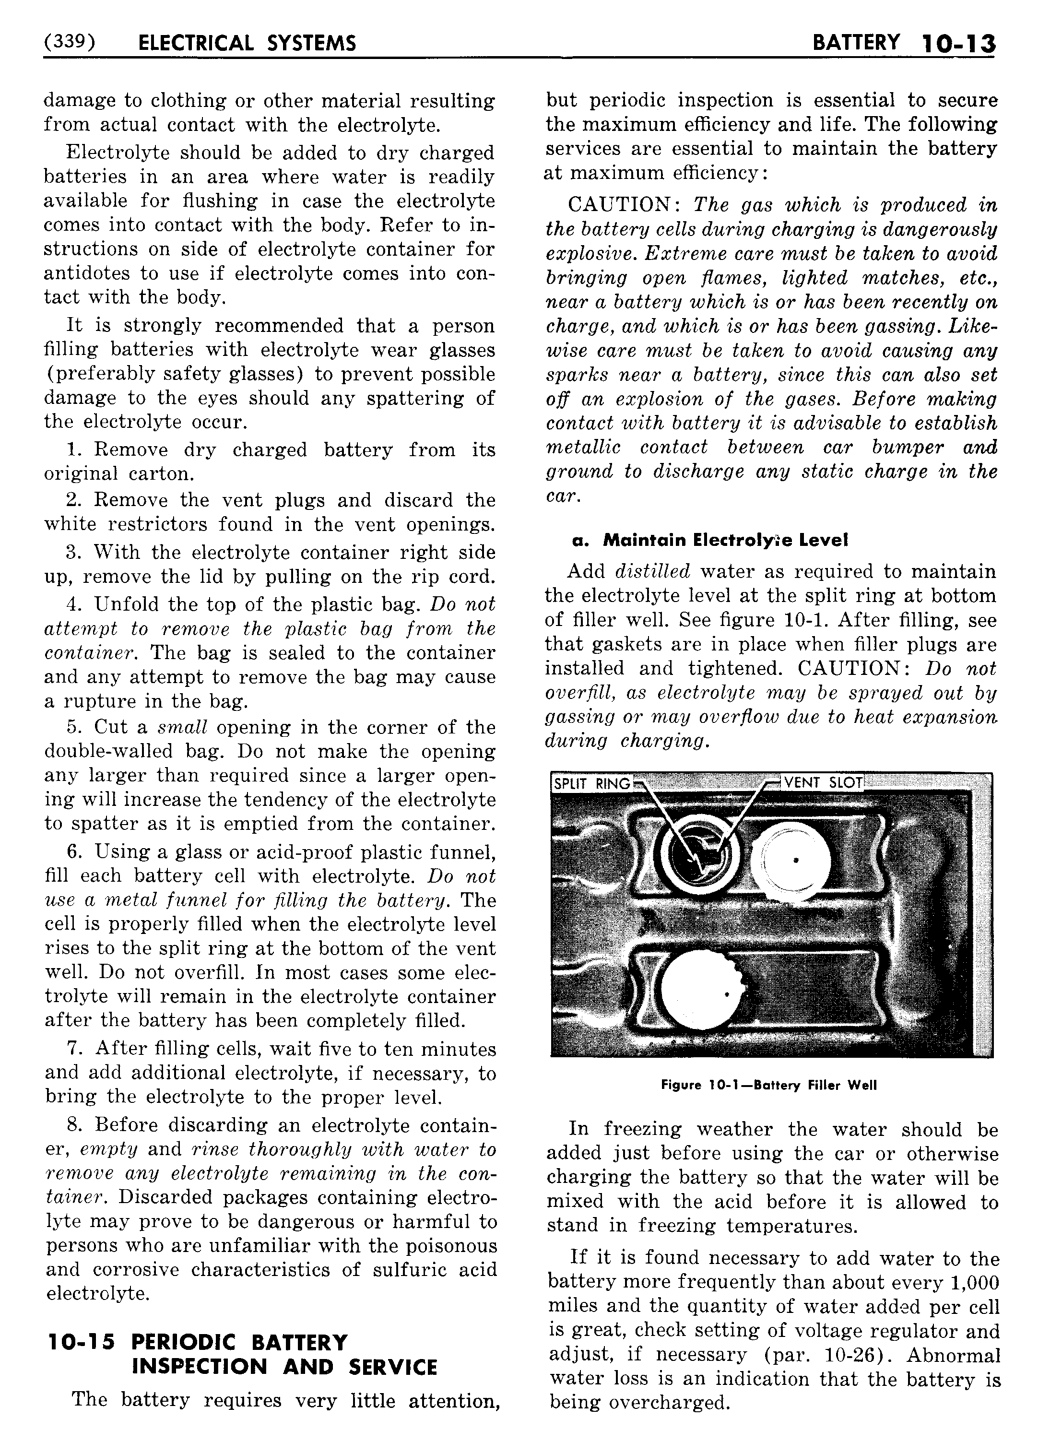 n_11 1956 Buick Shop Manual - Electrical Systems-013-013.jpg